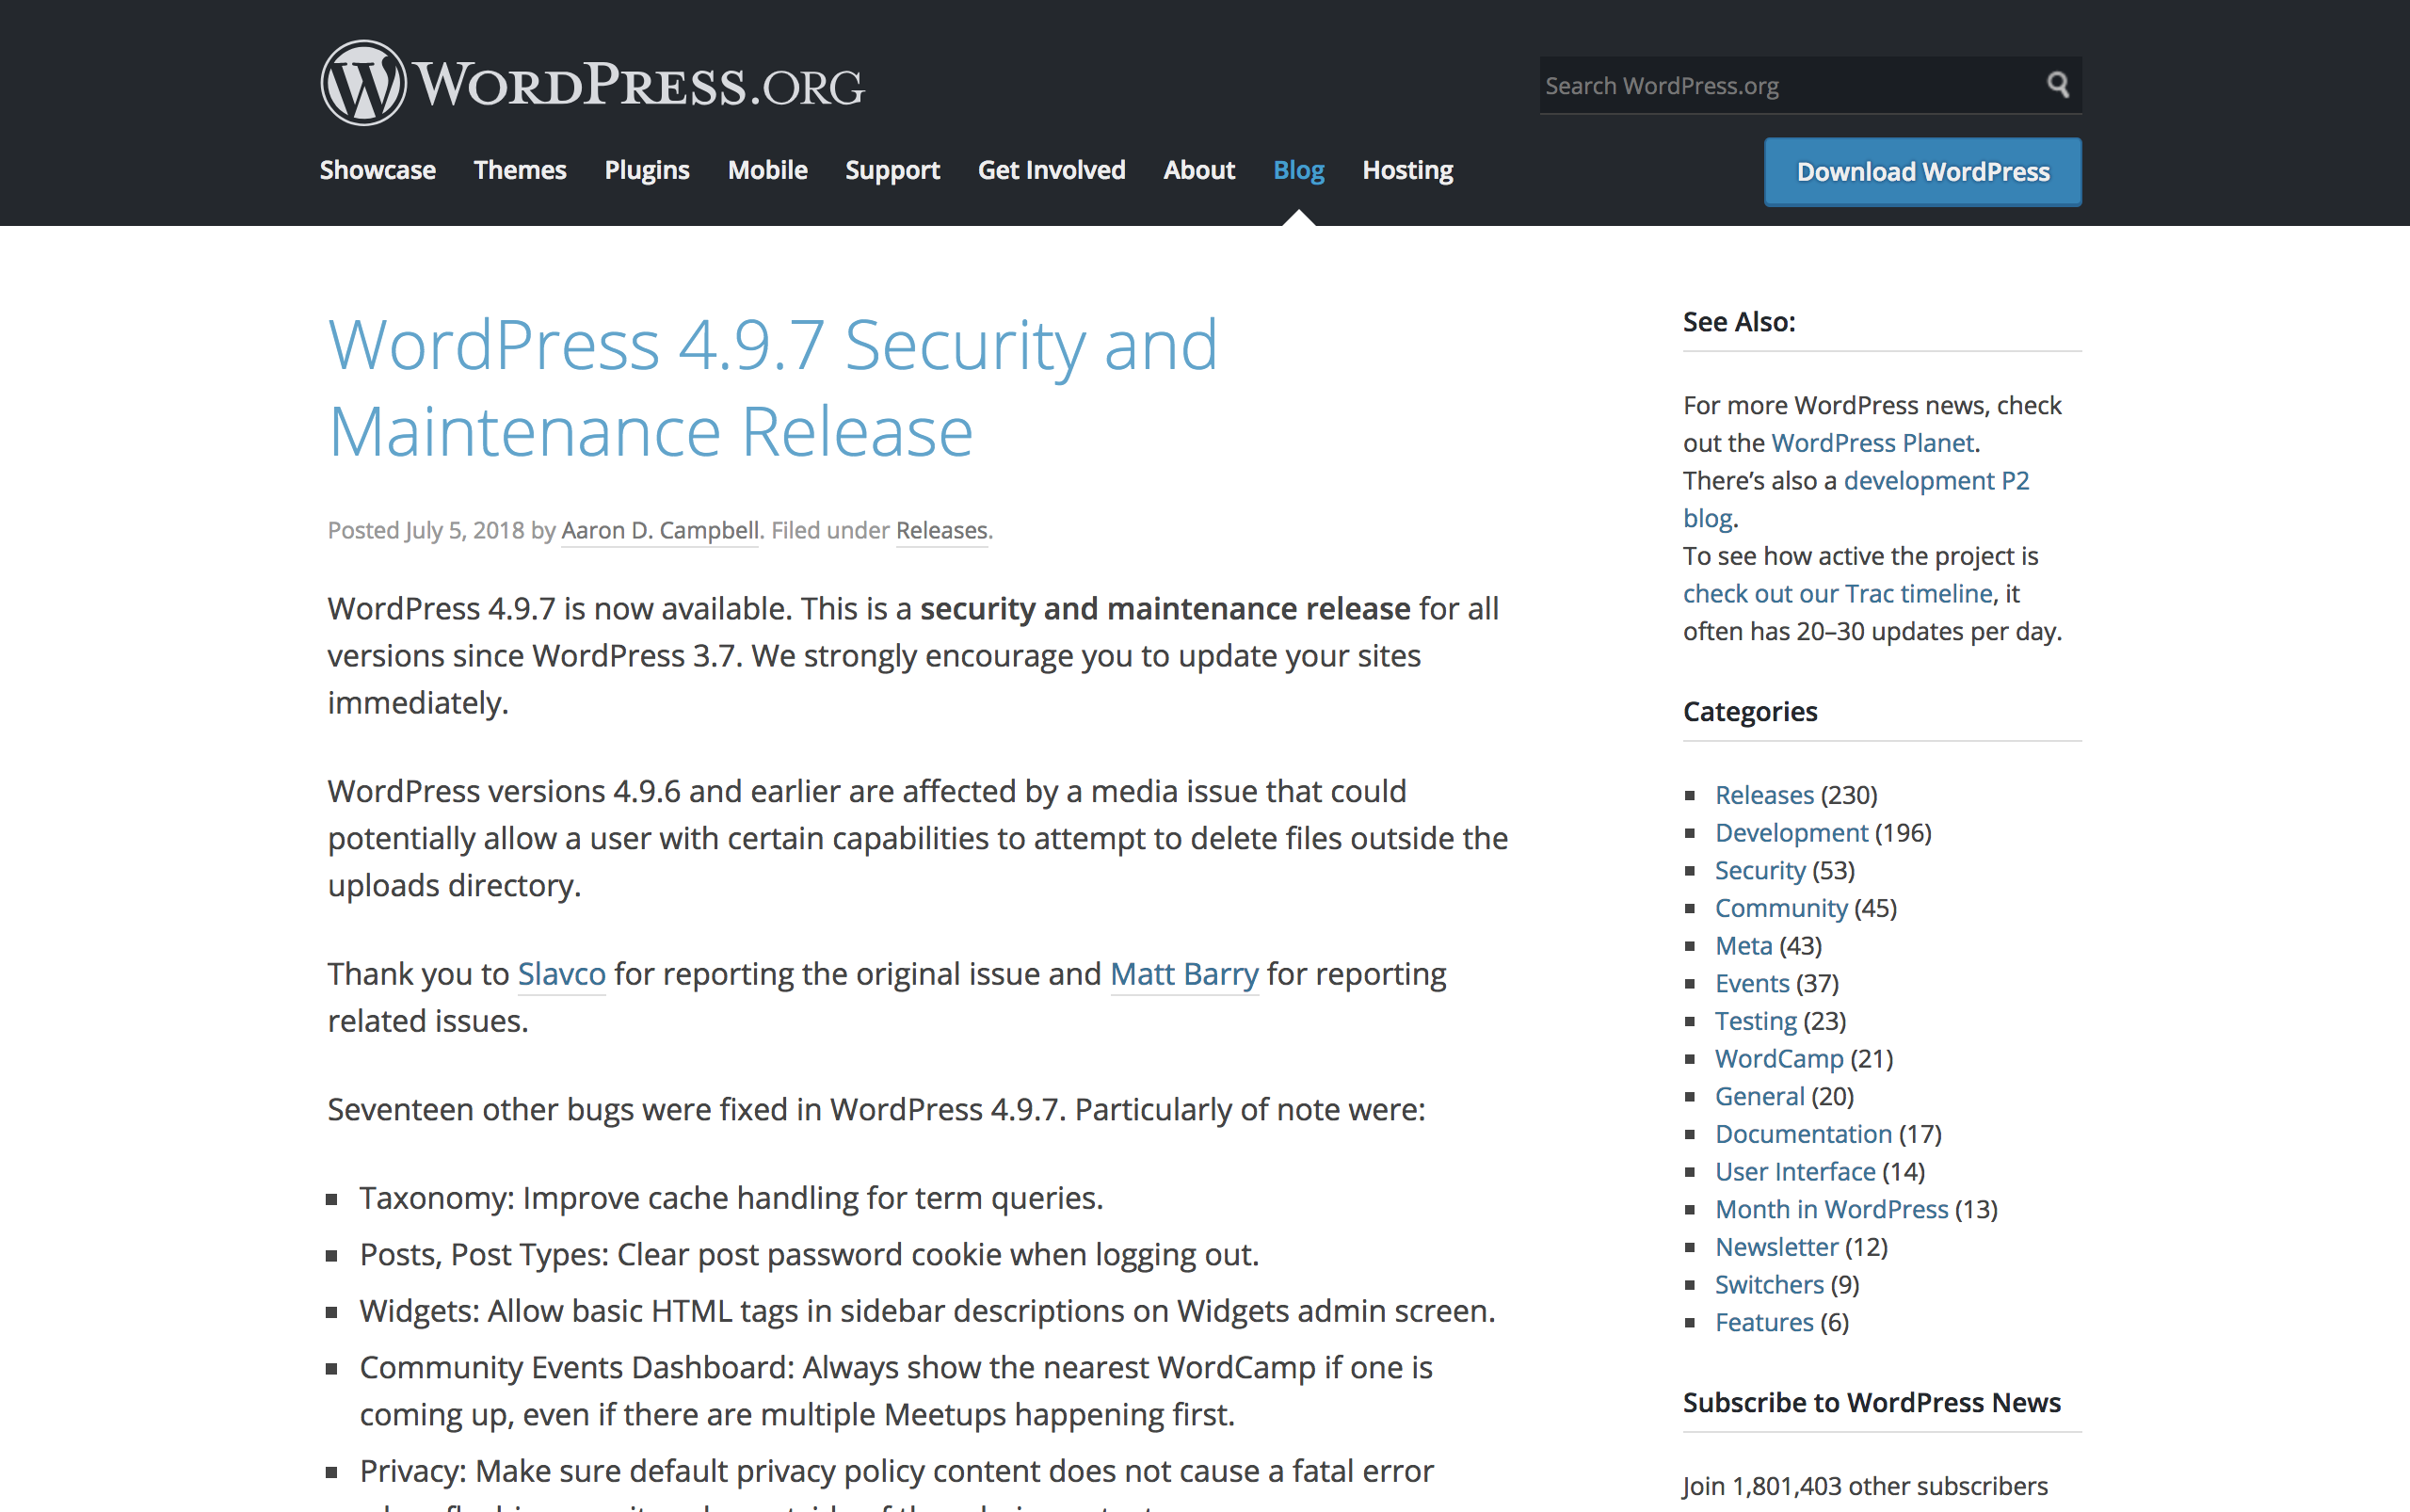 WordPress 4.9.7 Security and Maintenance Release